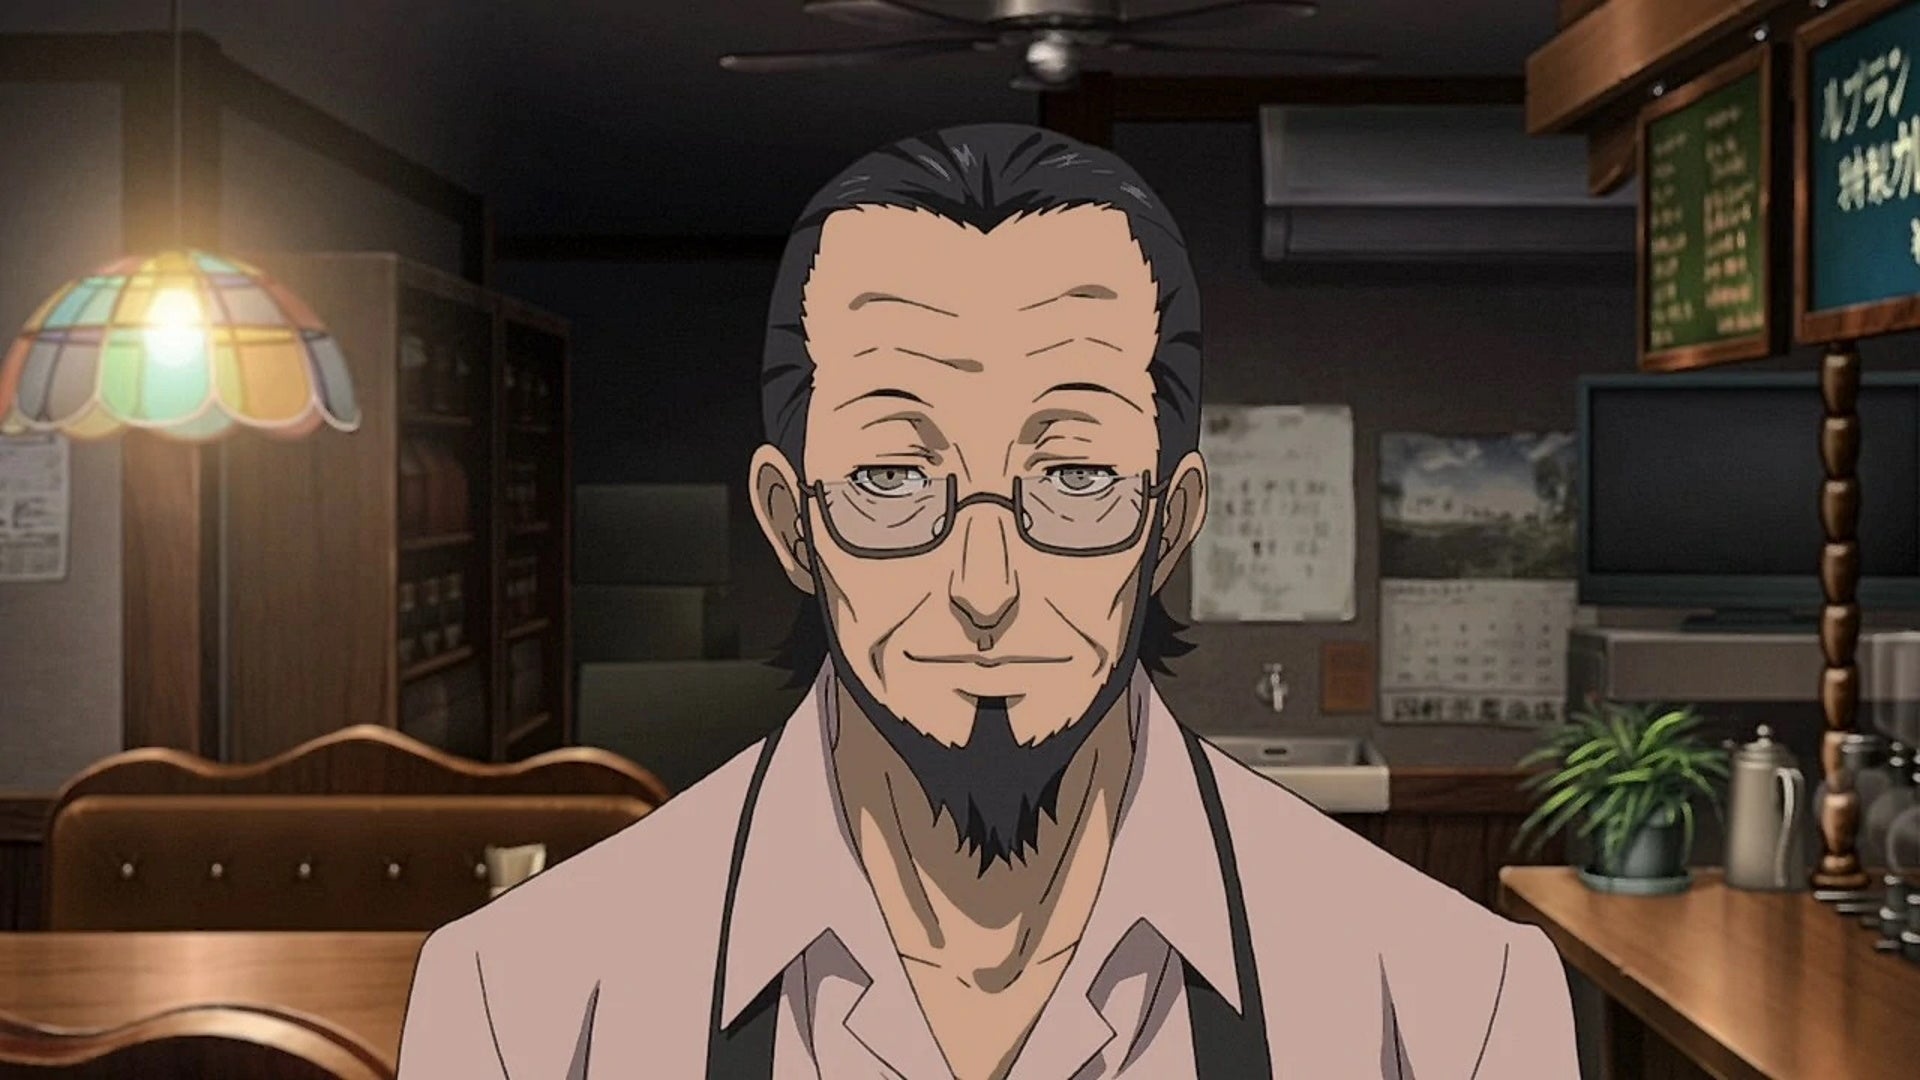 Persona 5 Royal Sojiro Confidant: An anime middle-aged man wearing a pink shirt and glasses stands in a dimly lit cafe